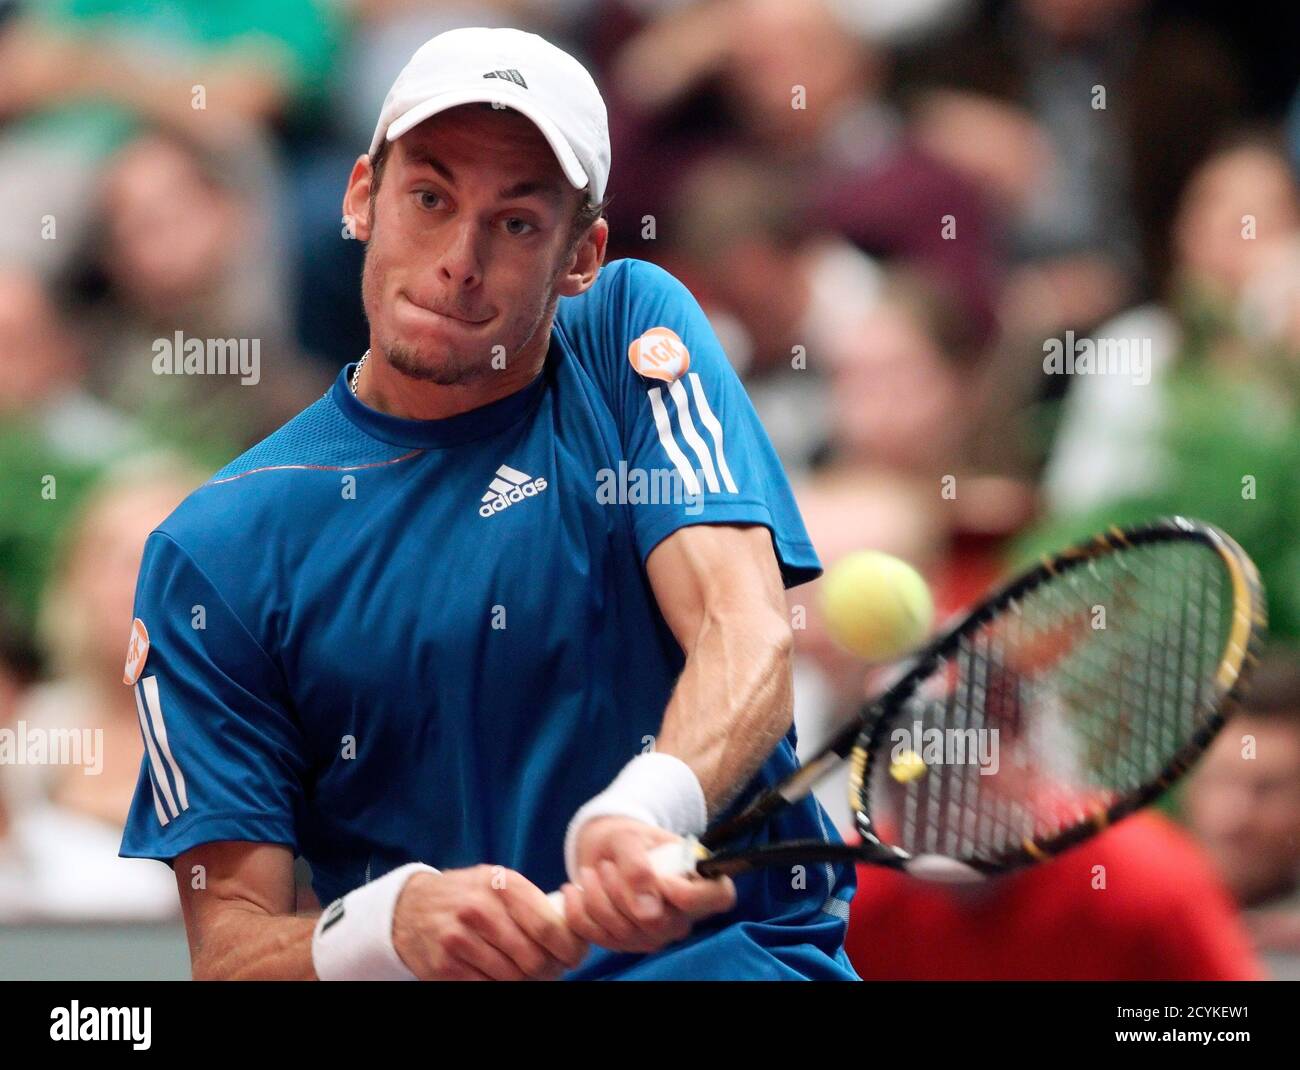 Andreas Haider-Maurer of Austria returns a ball to Michael Berrer of  Germany in their Vienna Open semi-final tennis match October 30, 2010.  REUTERS/Heinz-Peter Bader (AUSTRIA - Tags: SPORT TENNIS Stock Photo -